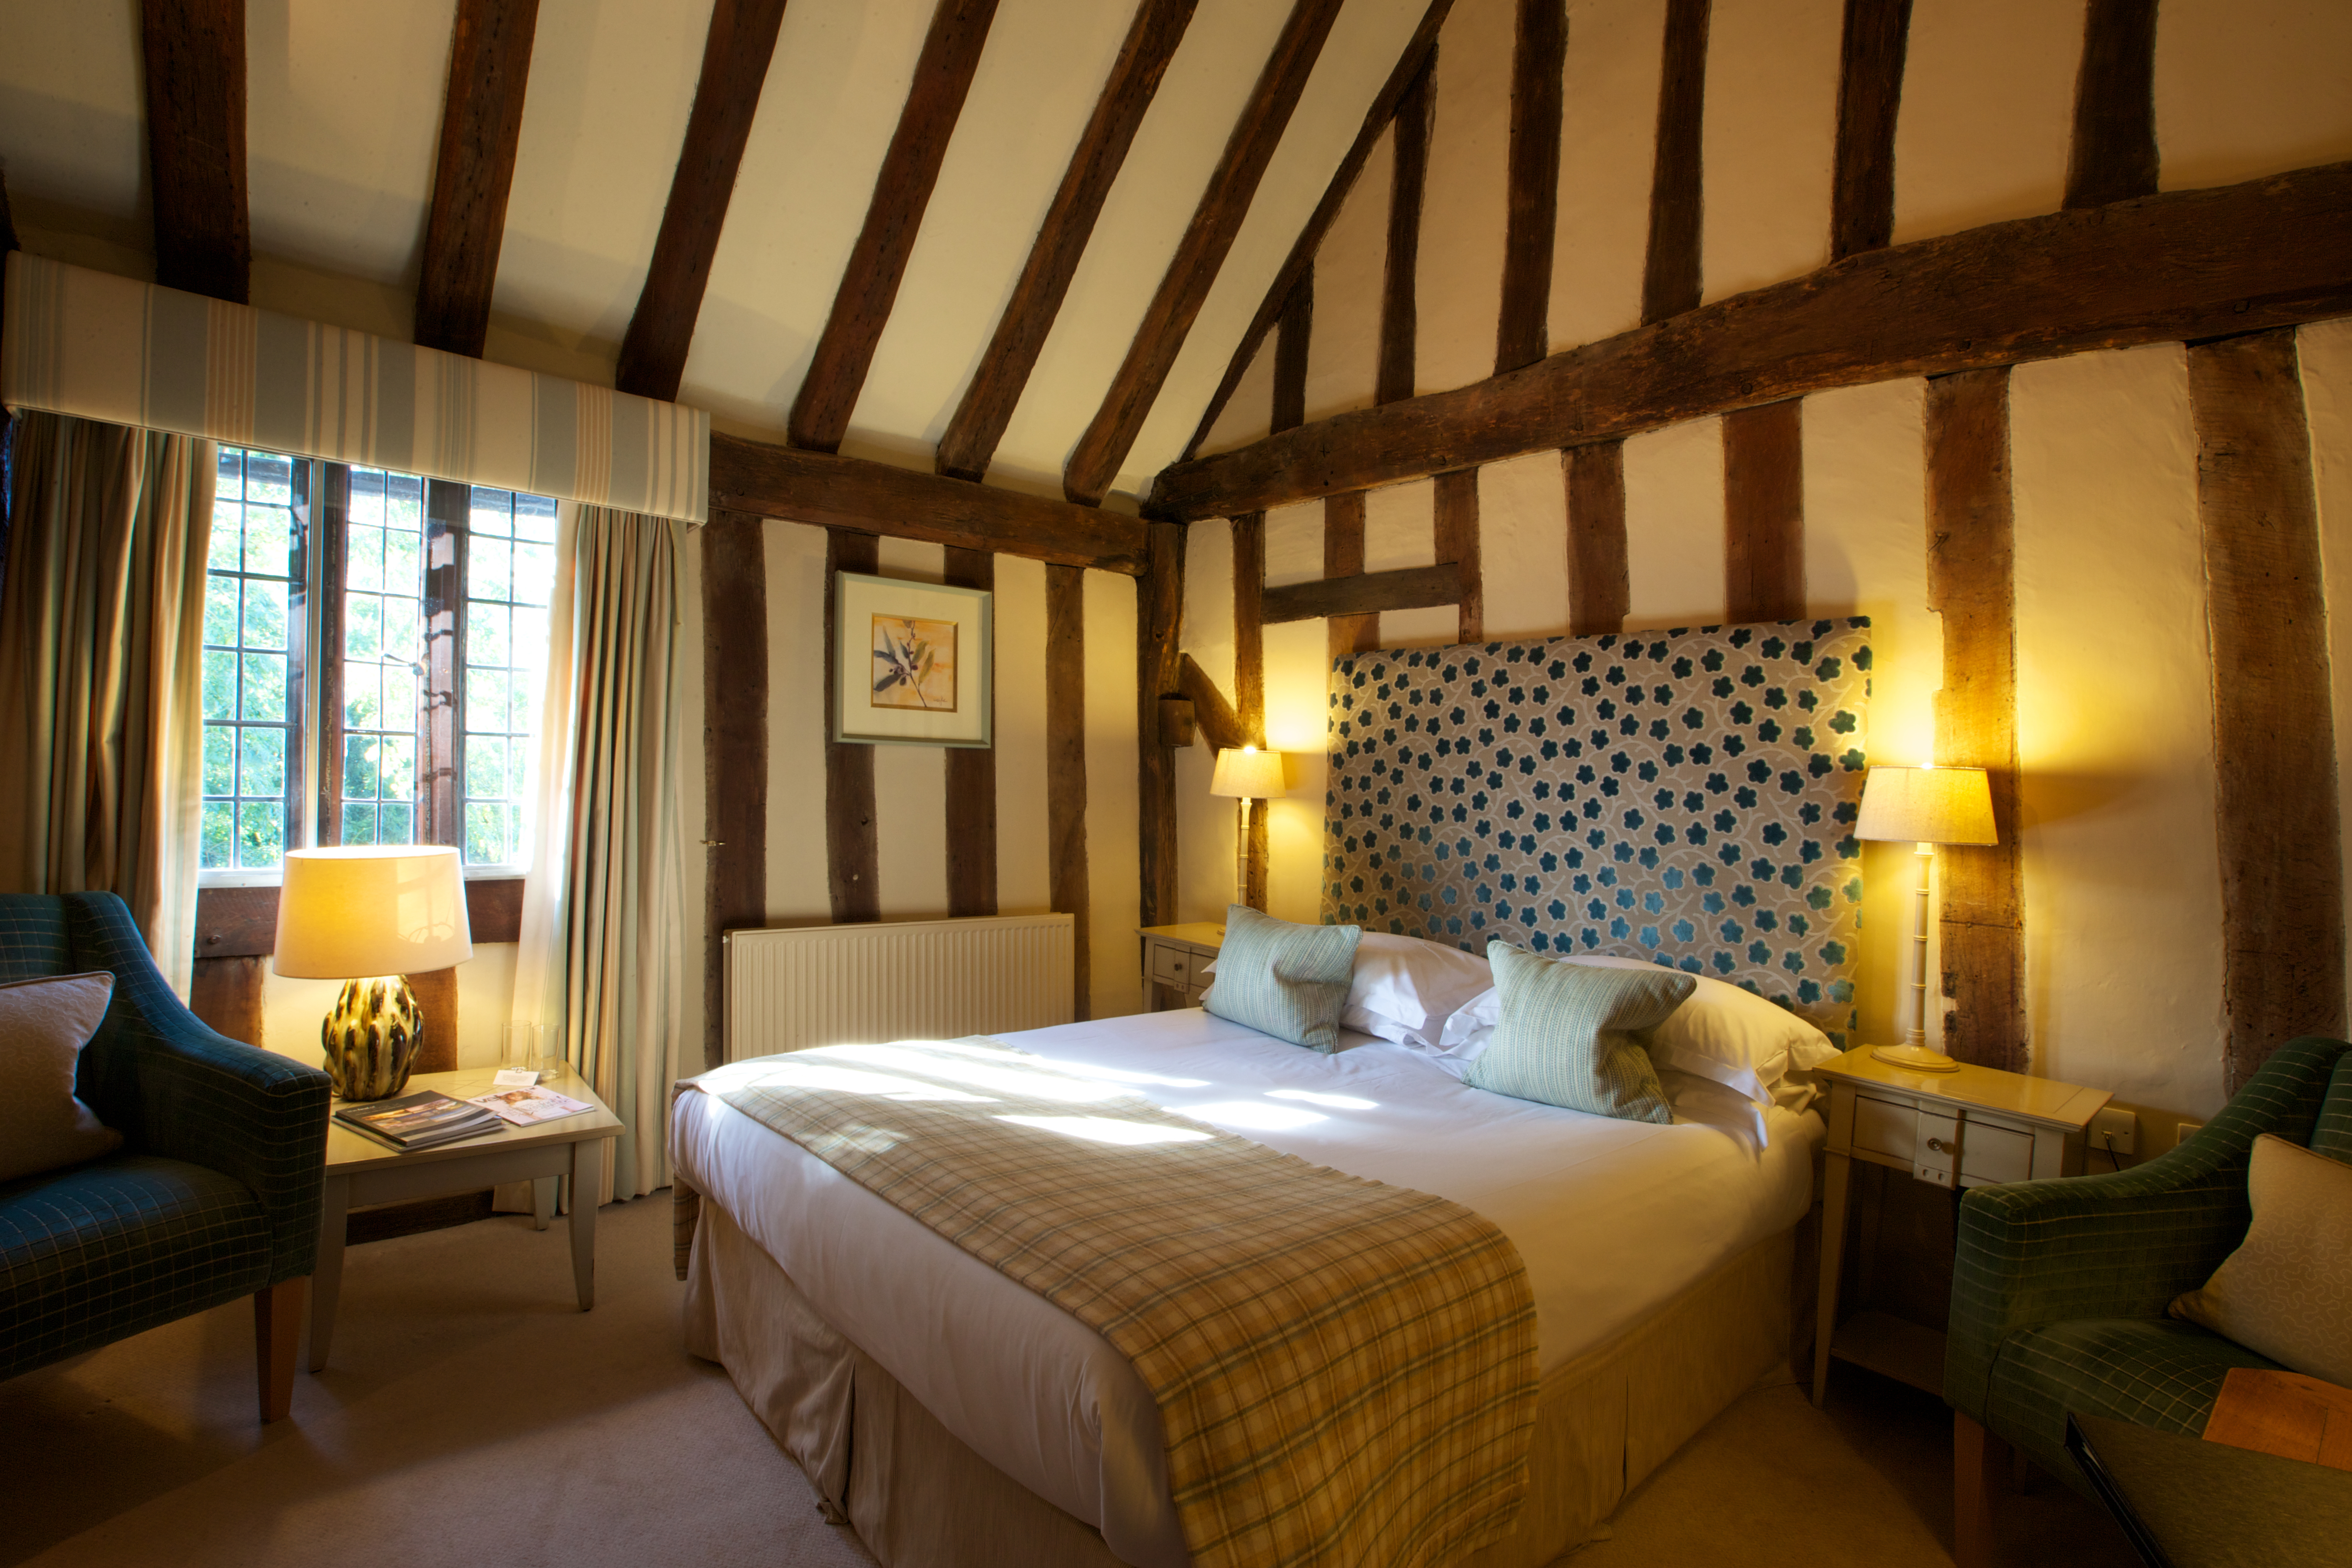 One of the bedrooms at The Swan at Lavenham